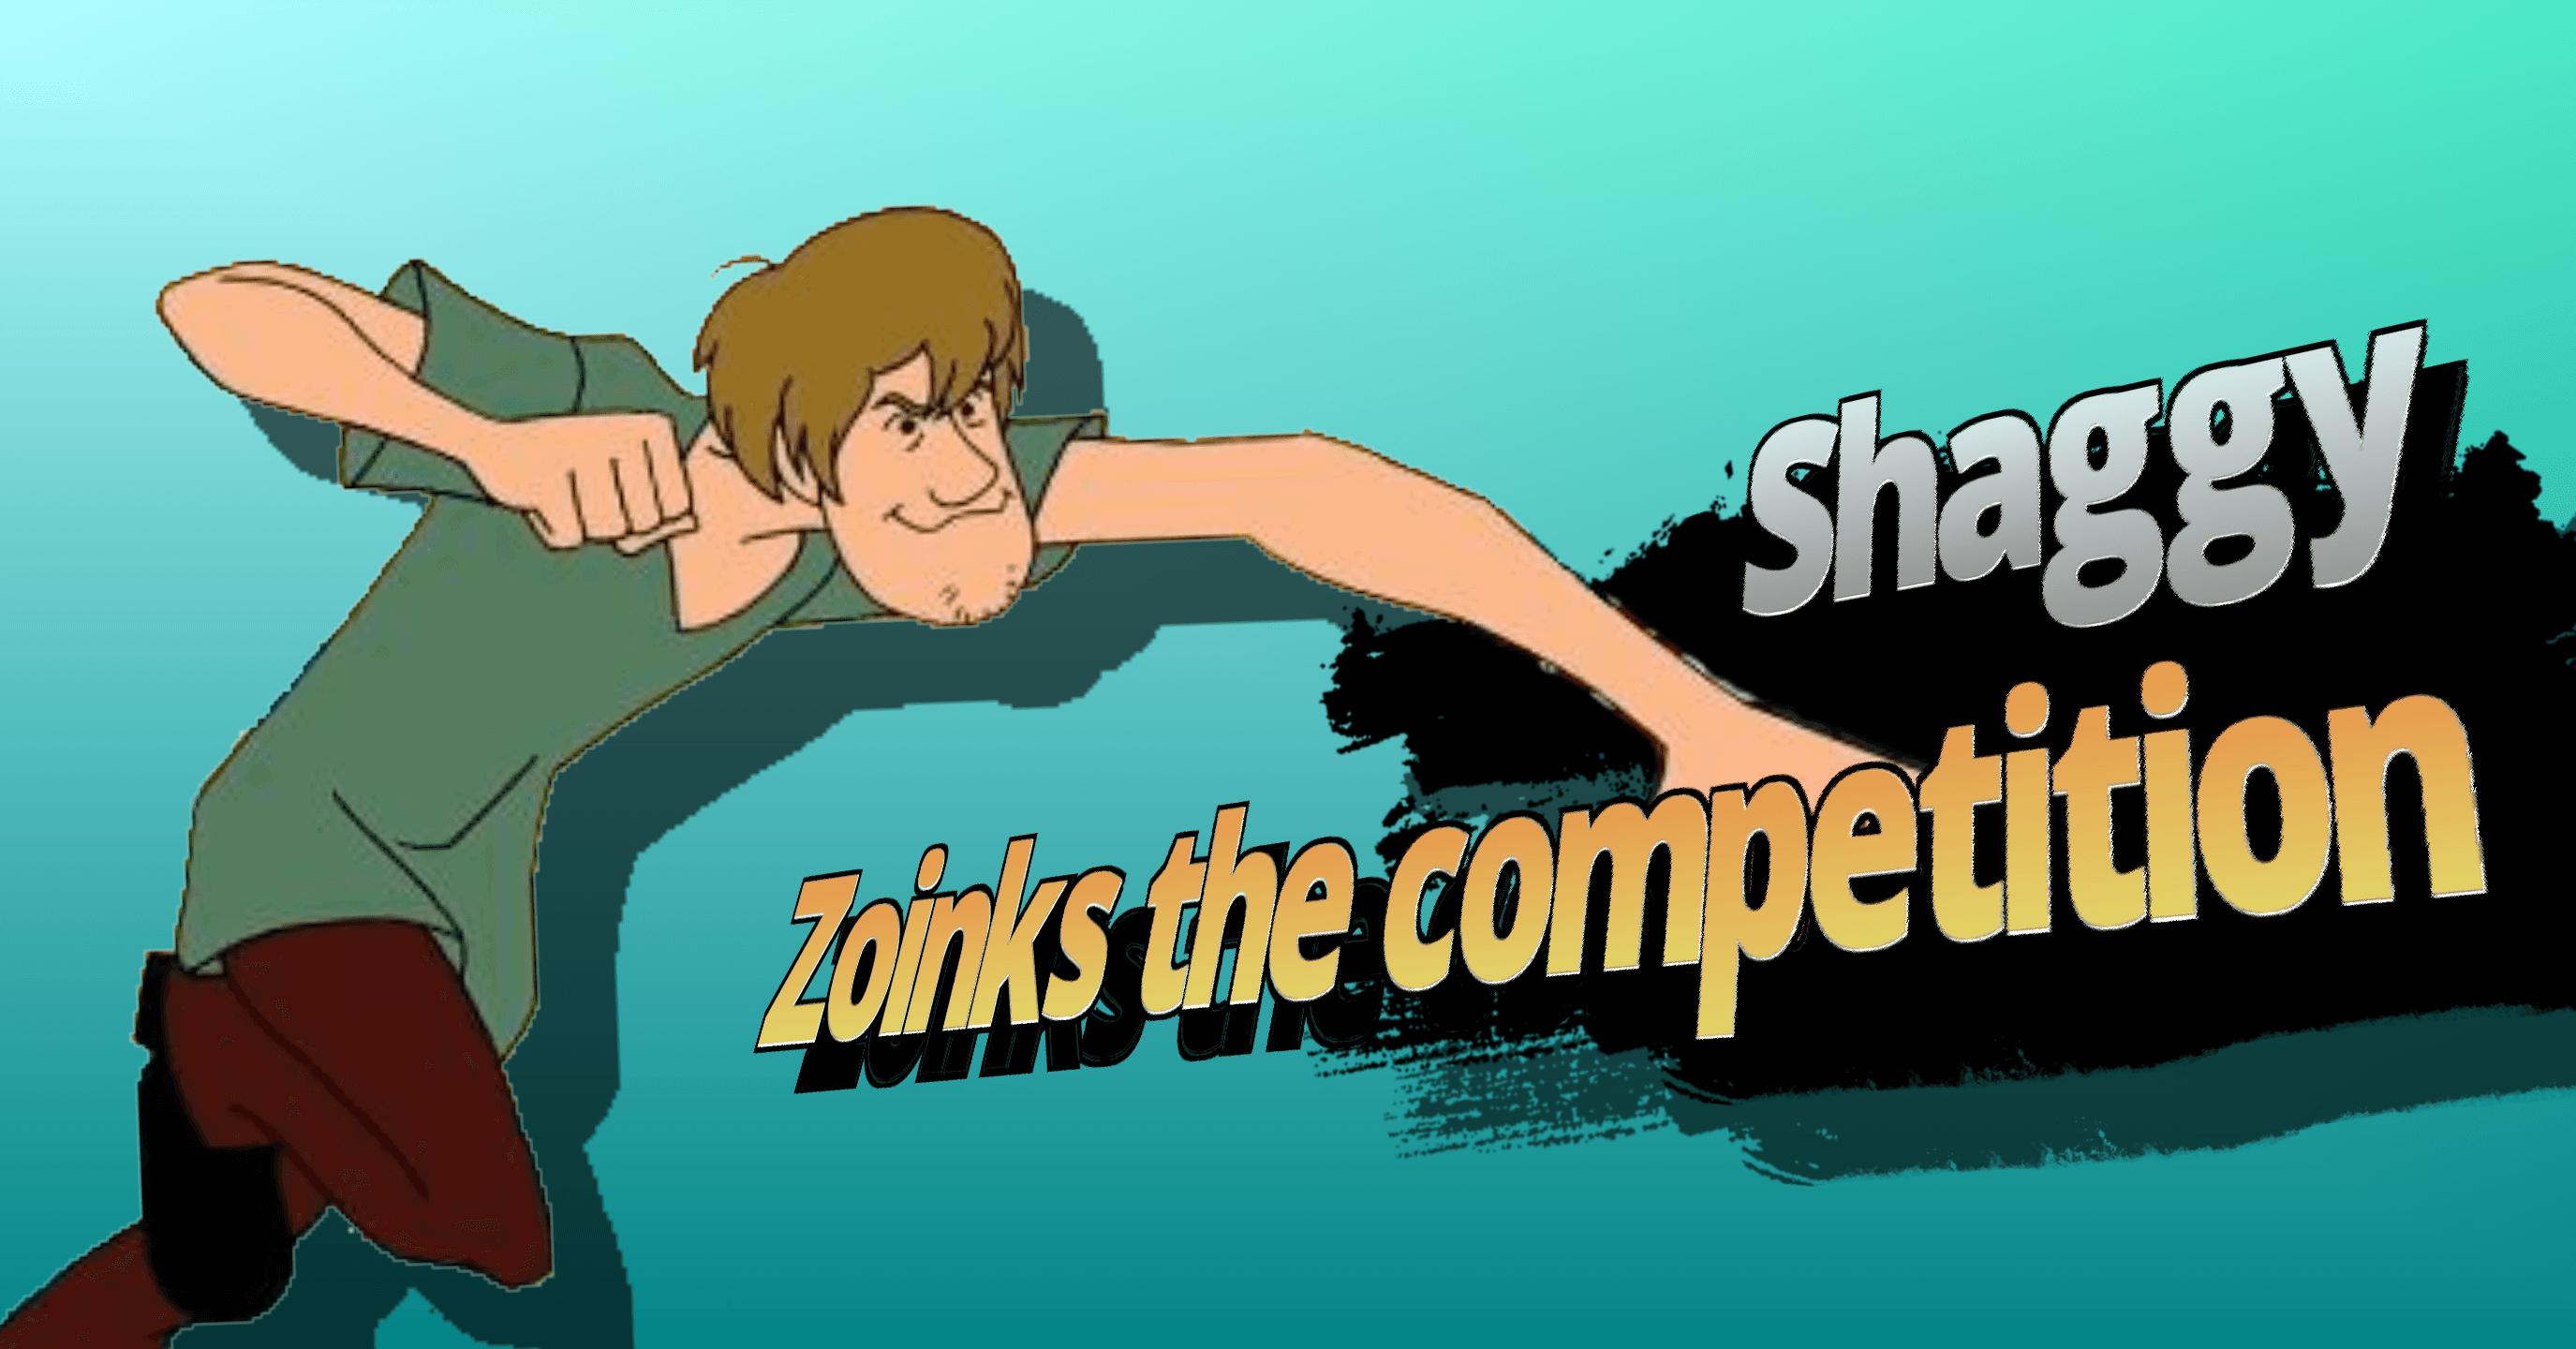 The 19 Funniest Shaggy From Scooby Doo Memes